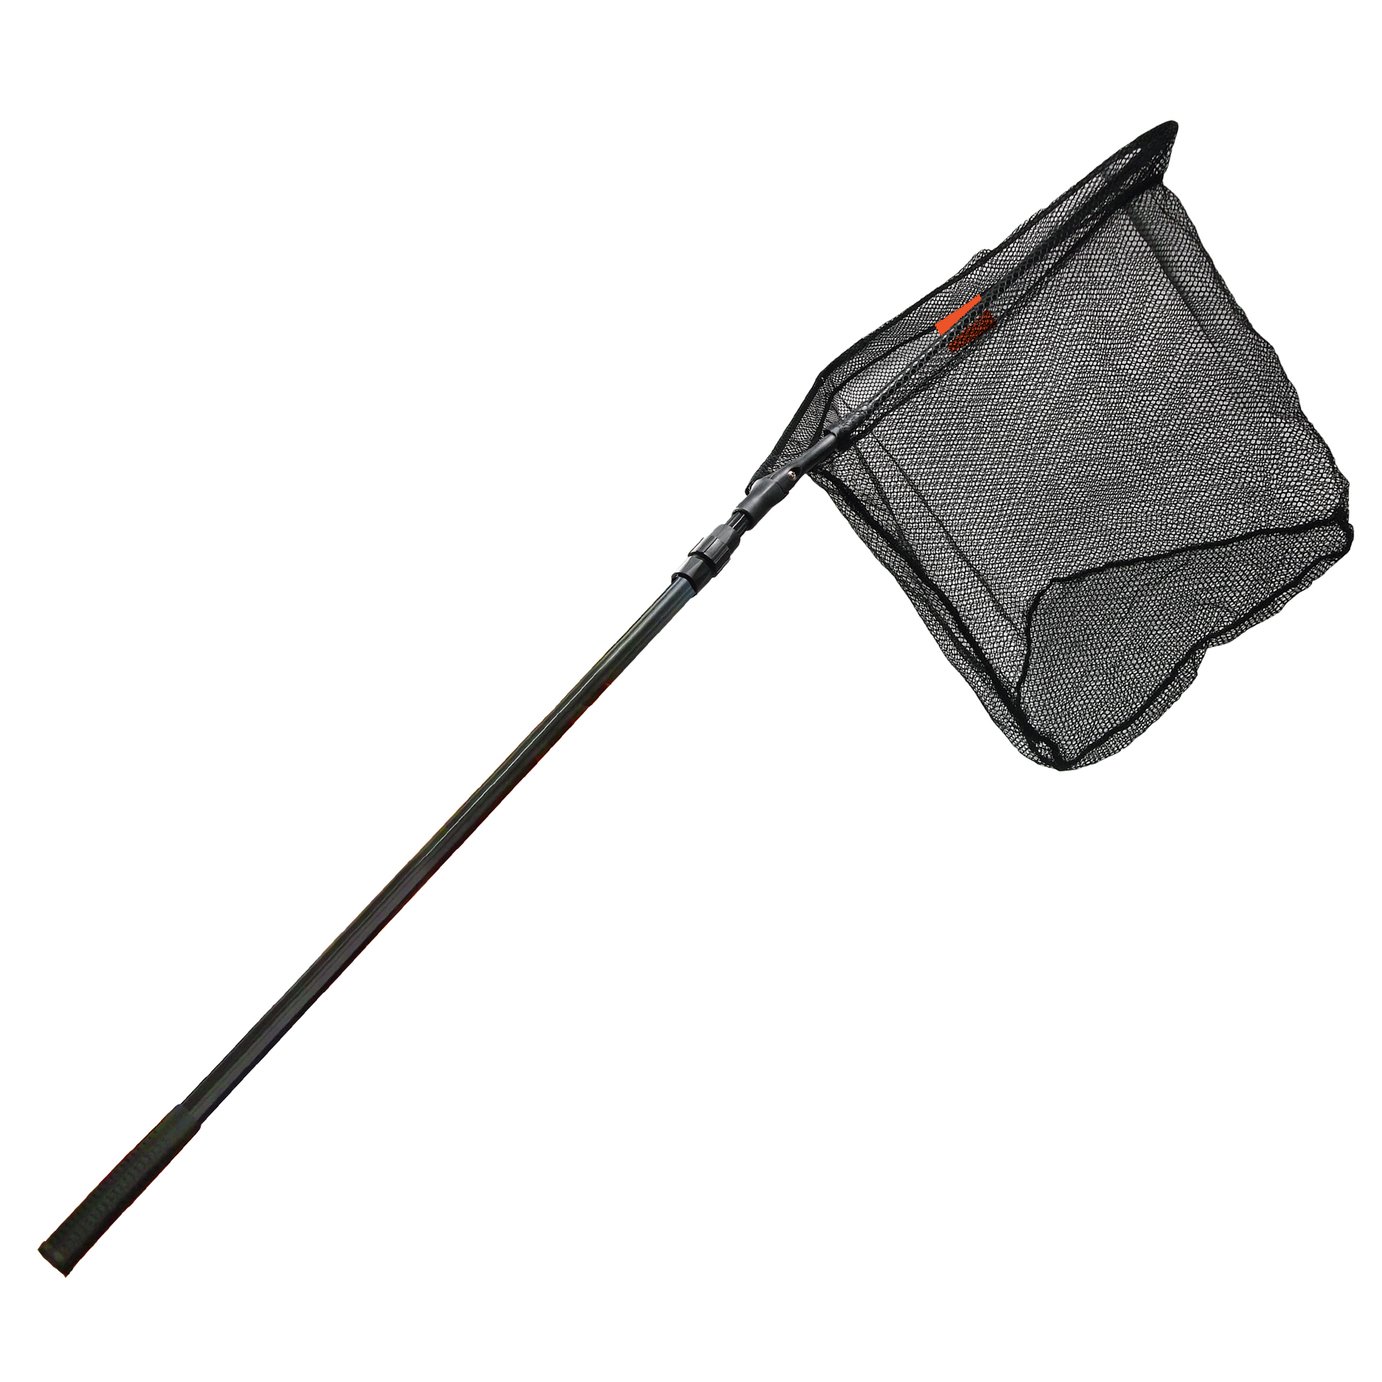 50 x 50 x 50cm Ideal for Most UK Fisheries and 2m Telescopic Handle FLADEN Matt Hayes Angling Foundation Approved Landing Net with Aluminium Head 99-6189712